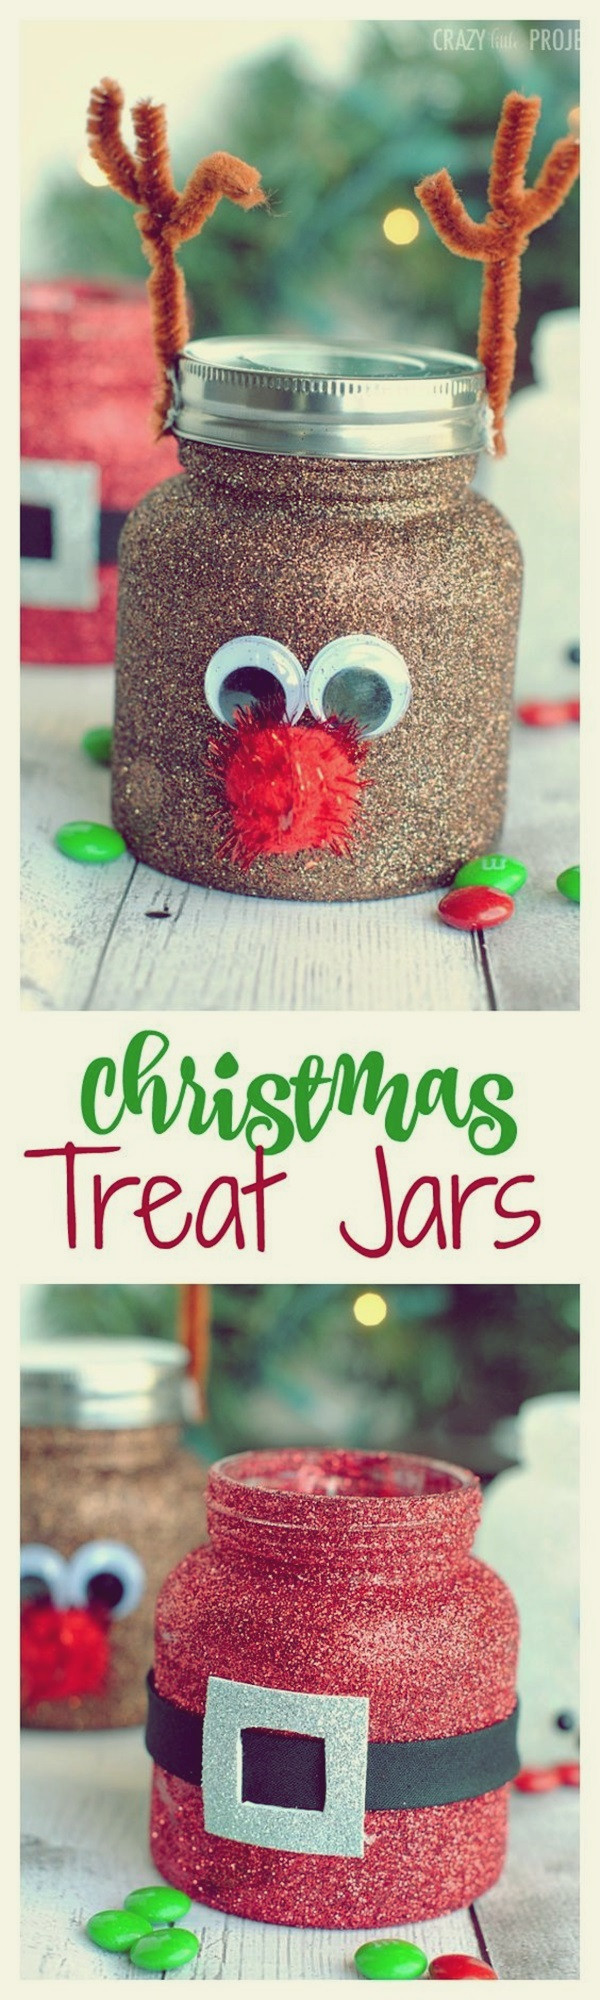 Holiday Gift Crafts Ideas
 135 Homemade Christmas Gift Ideas to make him say "WOW"